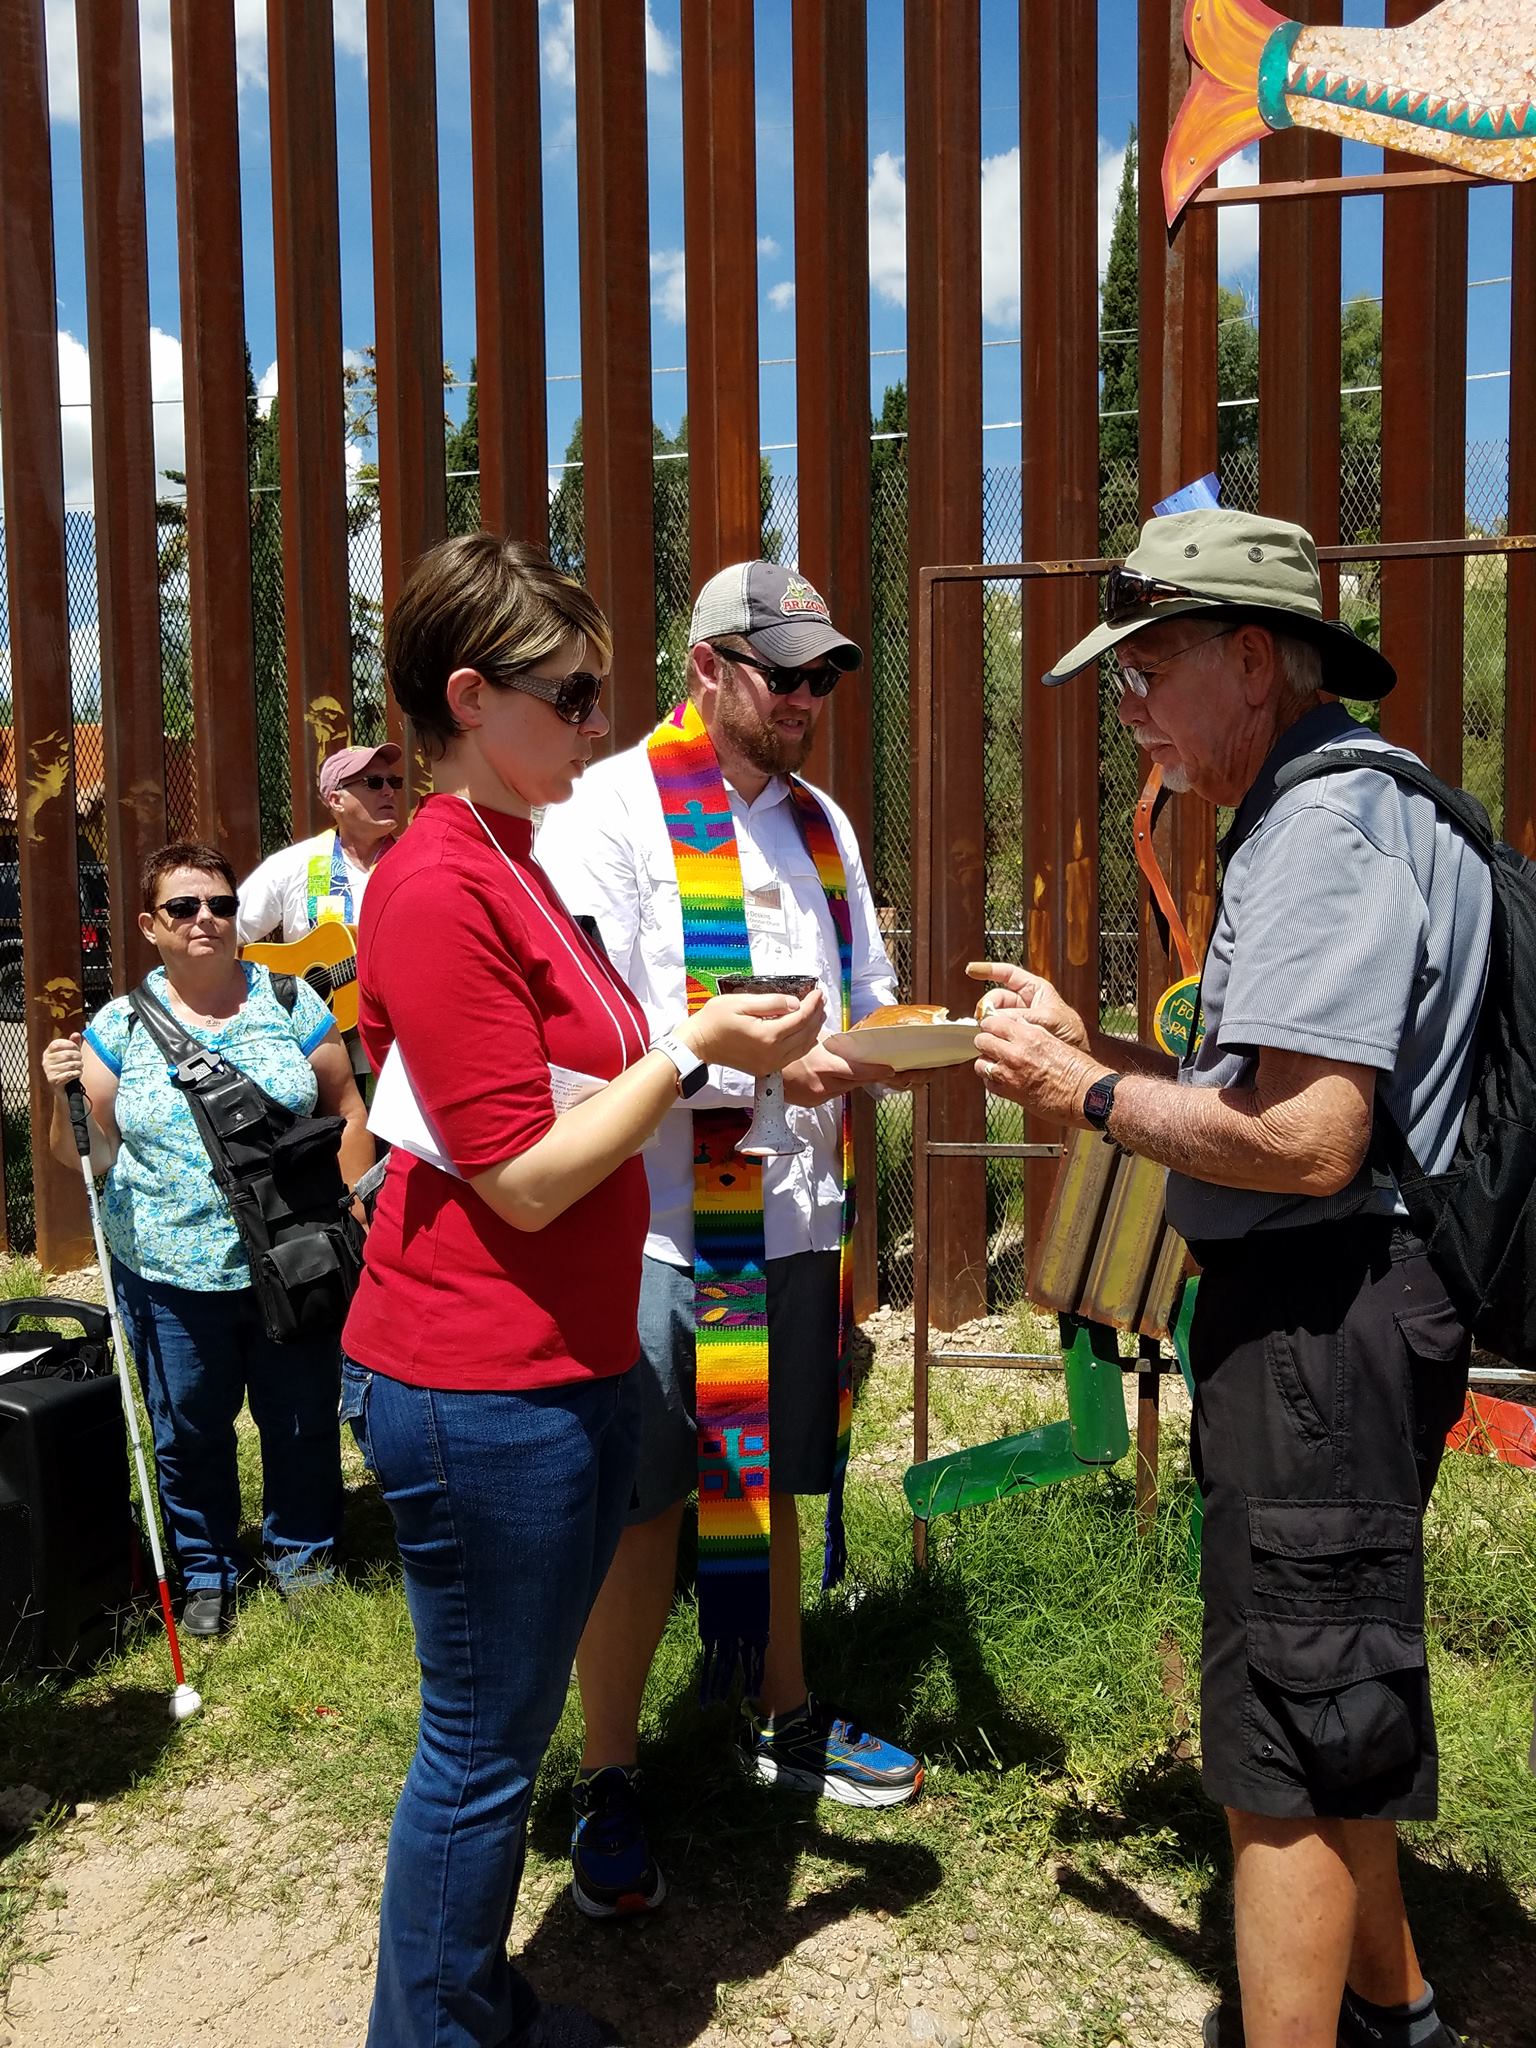 communion at the border wall by rebecca dickinson.jpg